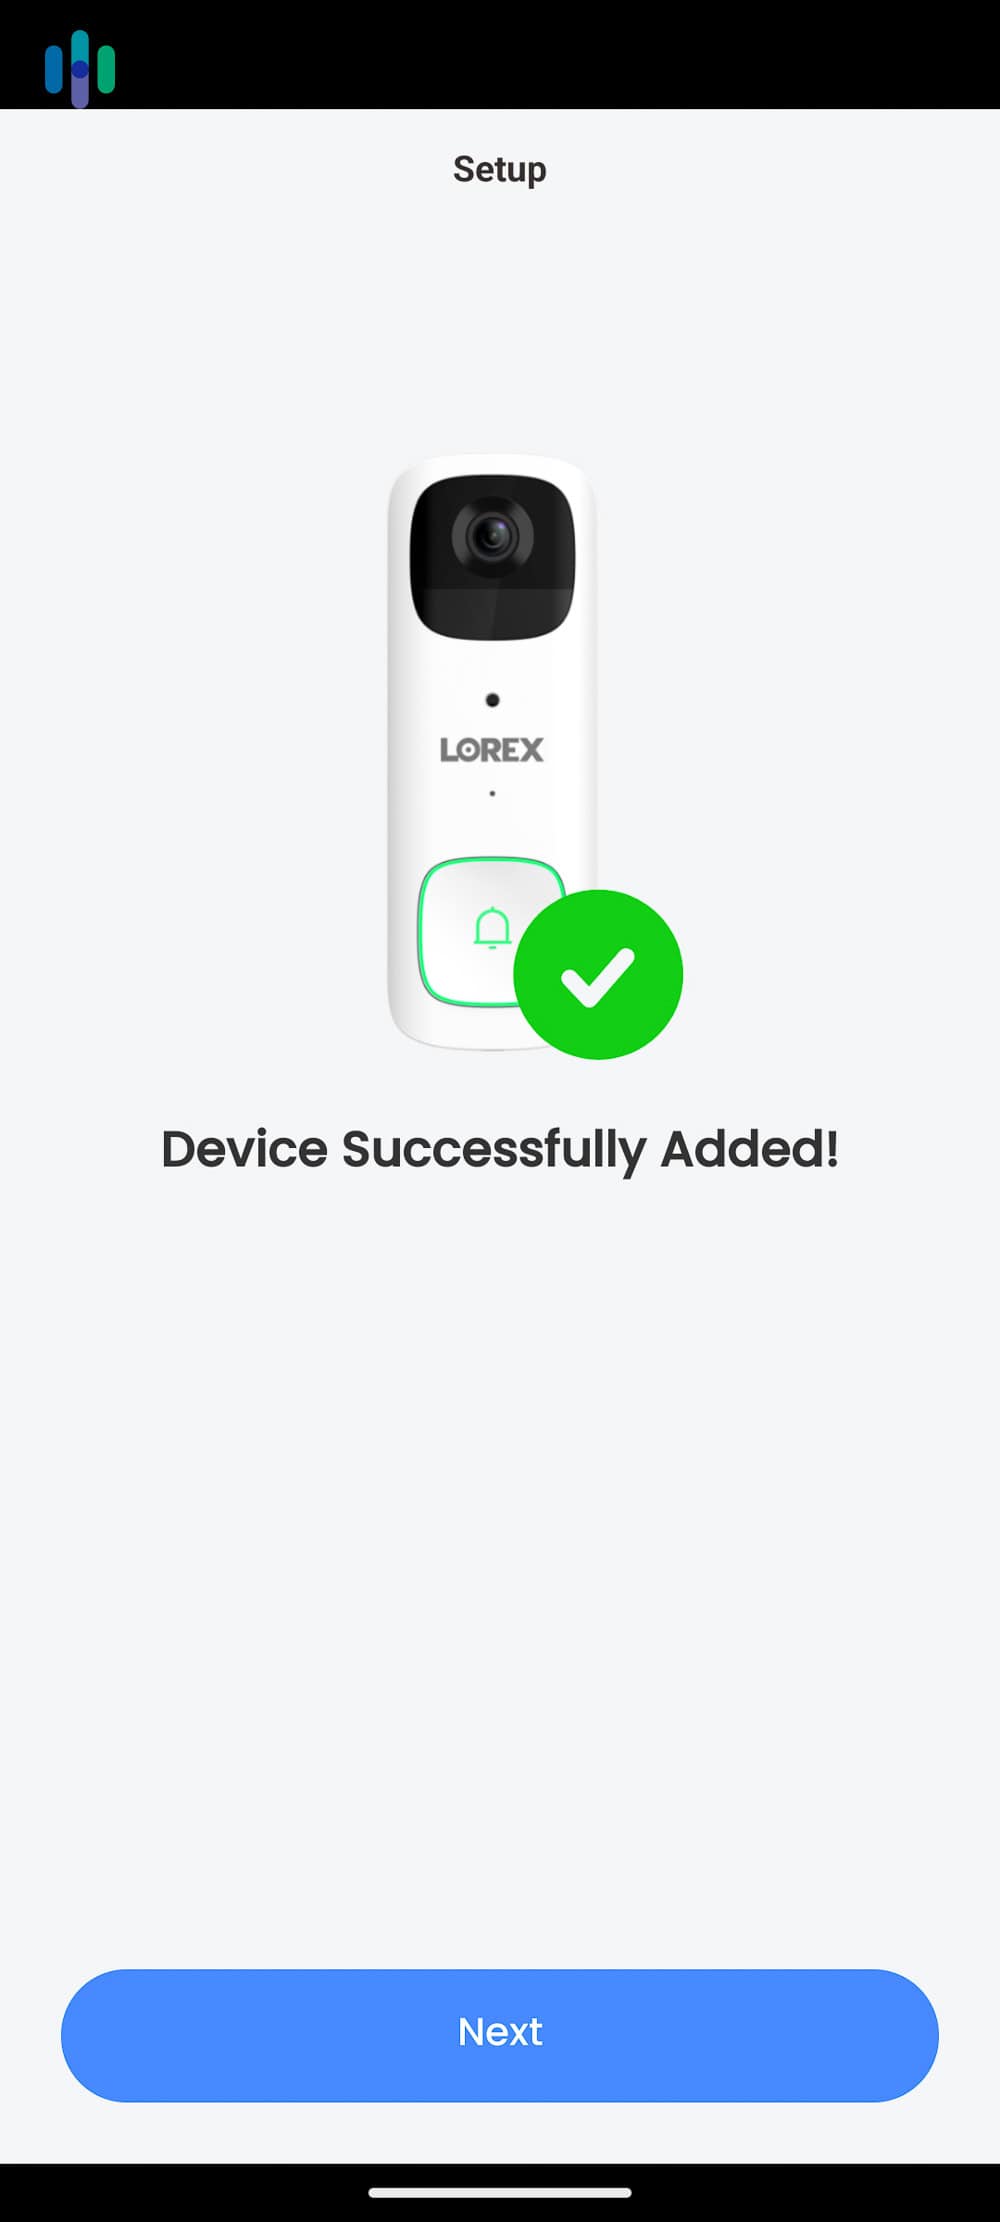 Device successfully added on the Lorex app